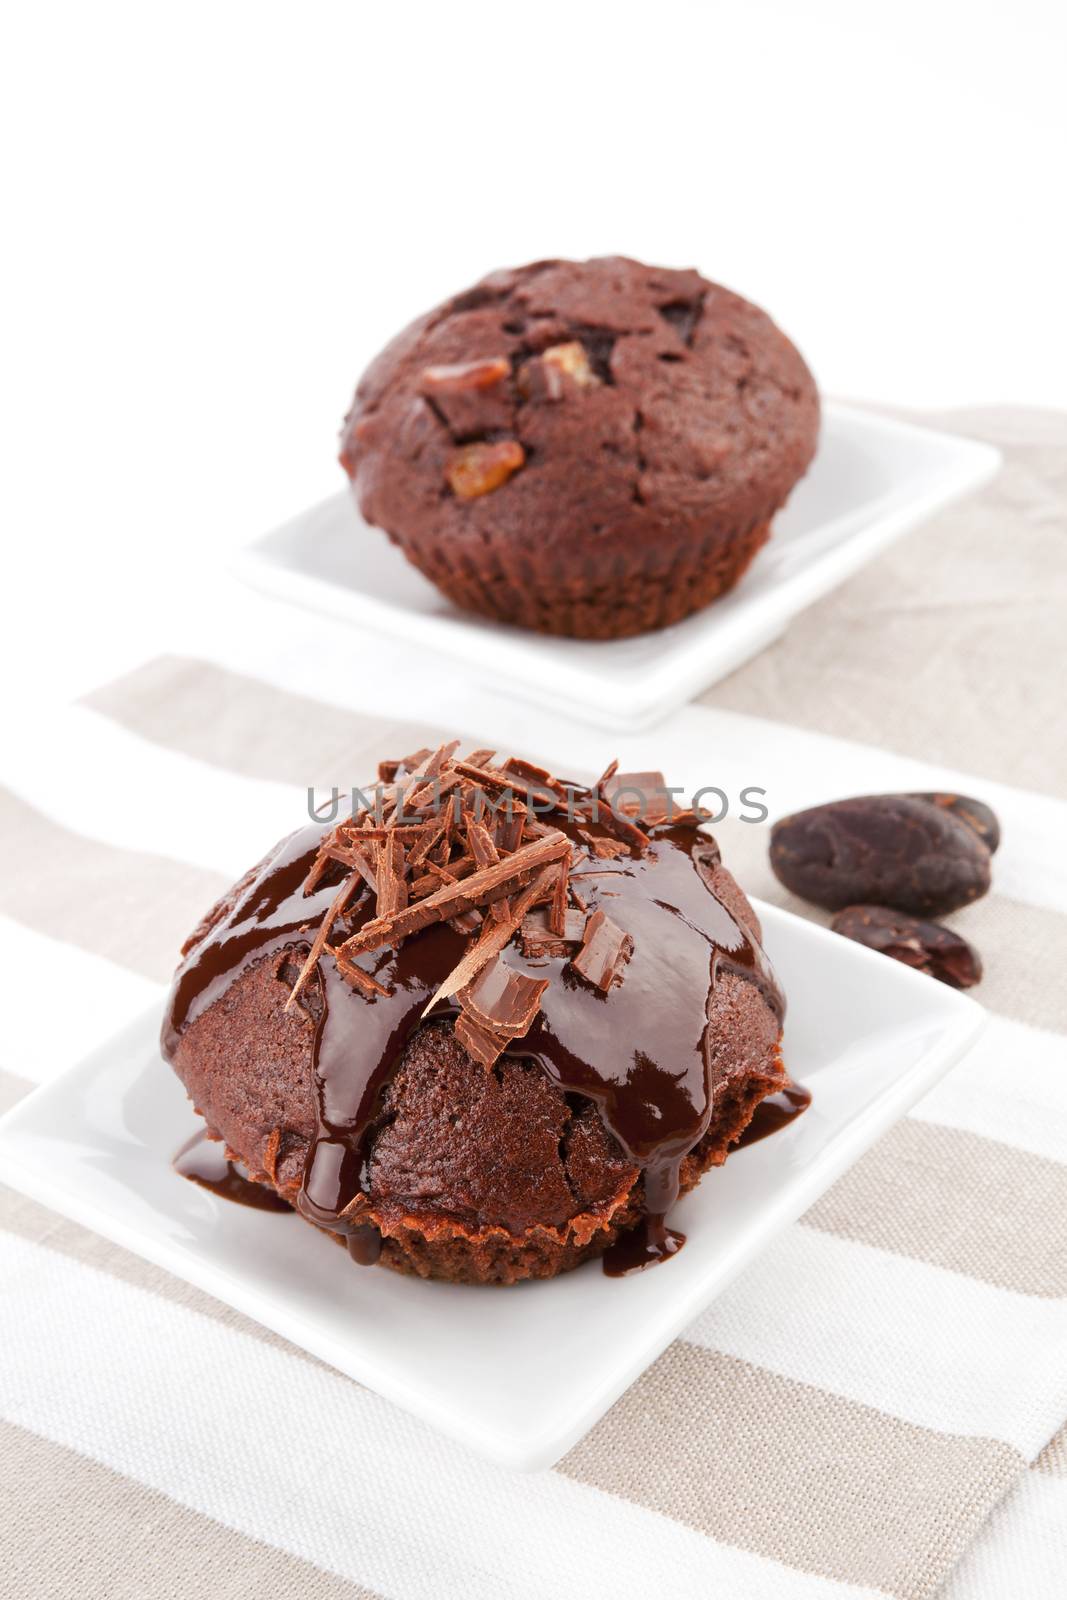 Delicious chocolated muffins. by eskymaks